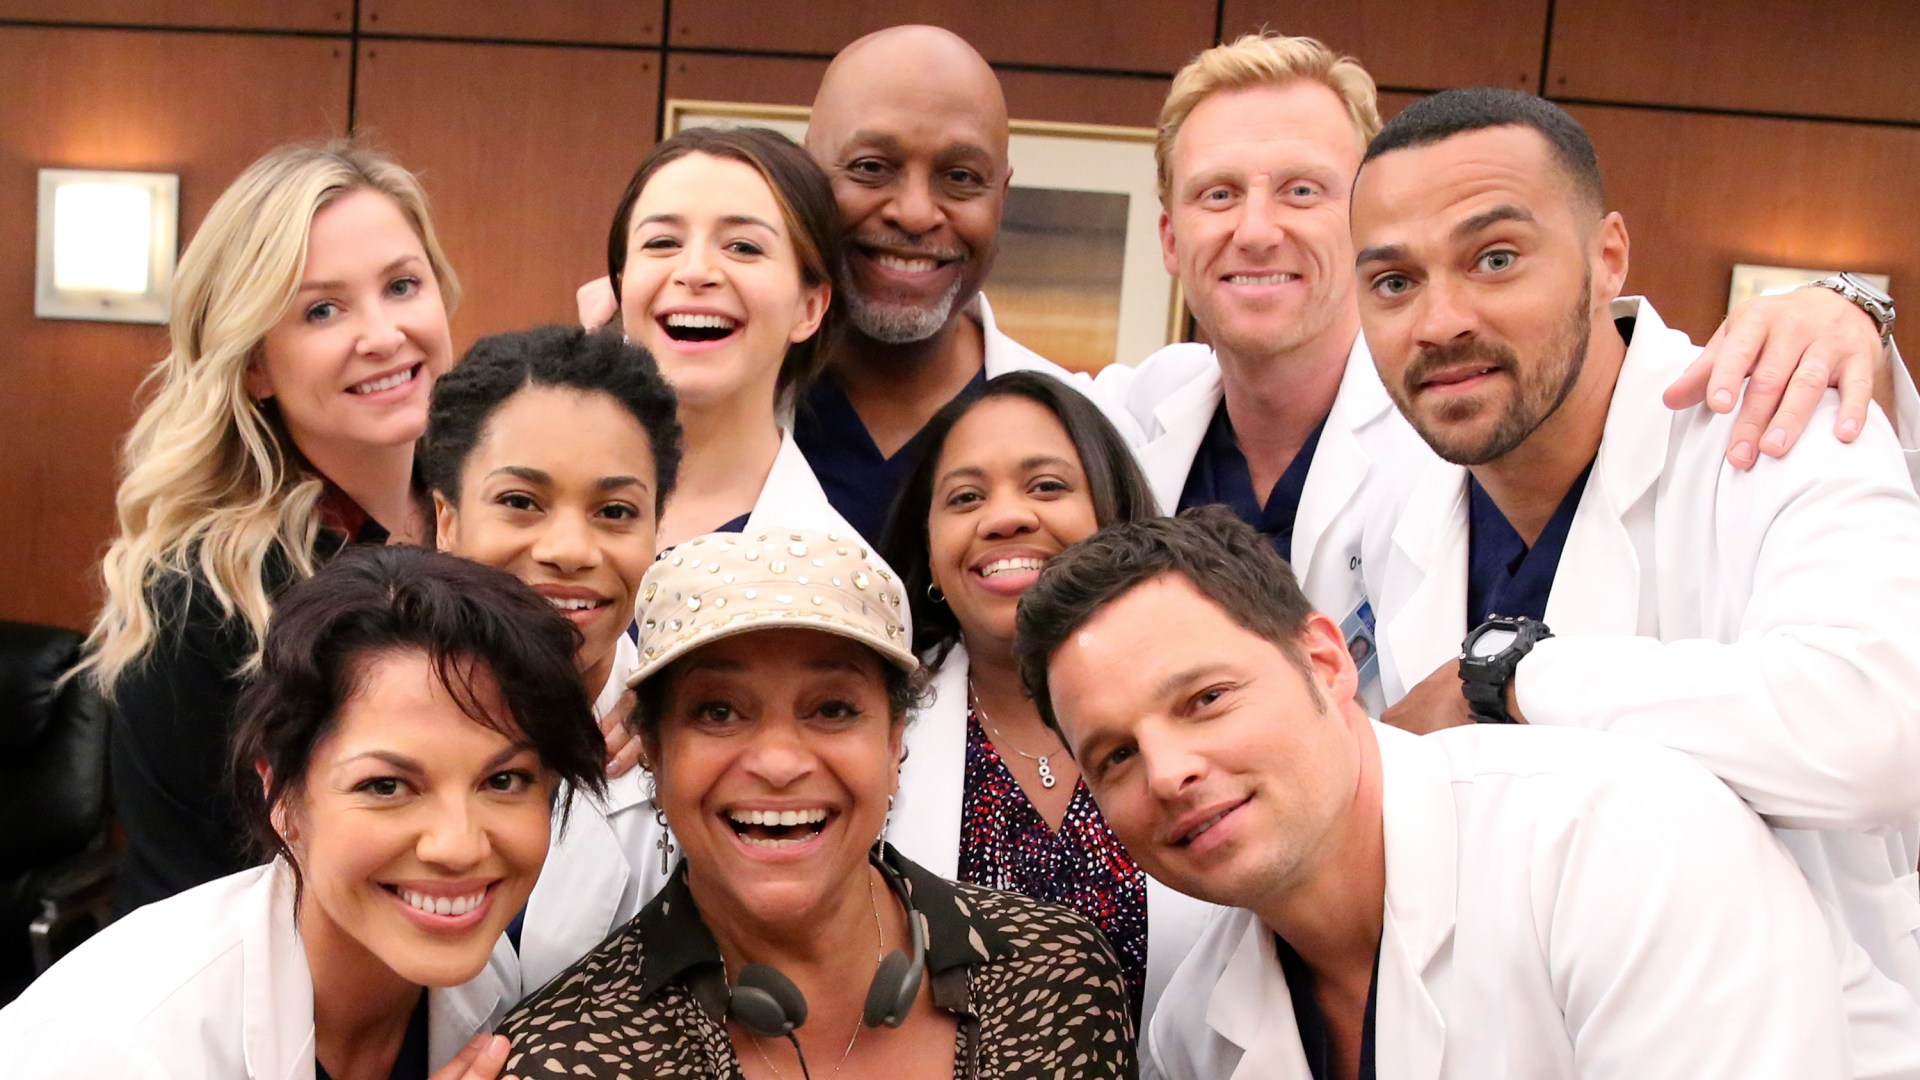 Grey's Anatomy' Stars' Net Worths How Much Does the Cast Make?